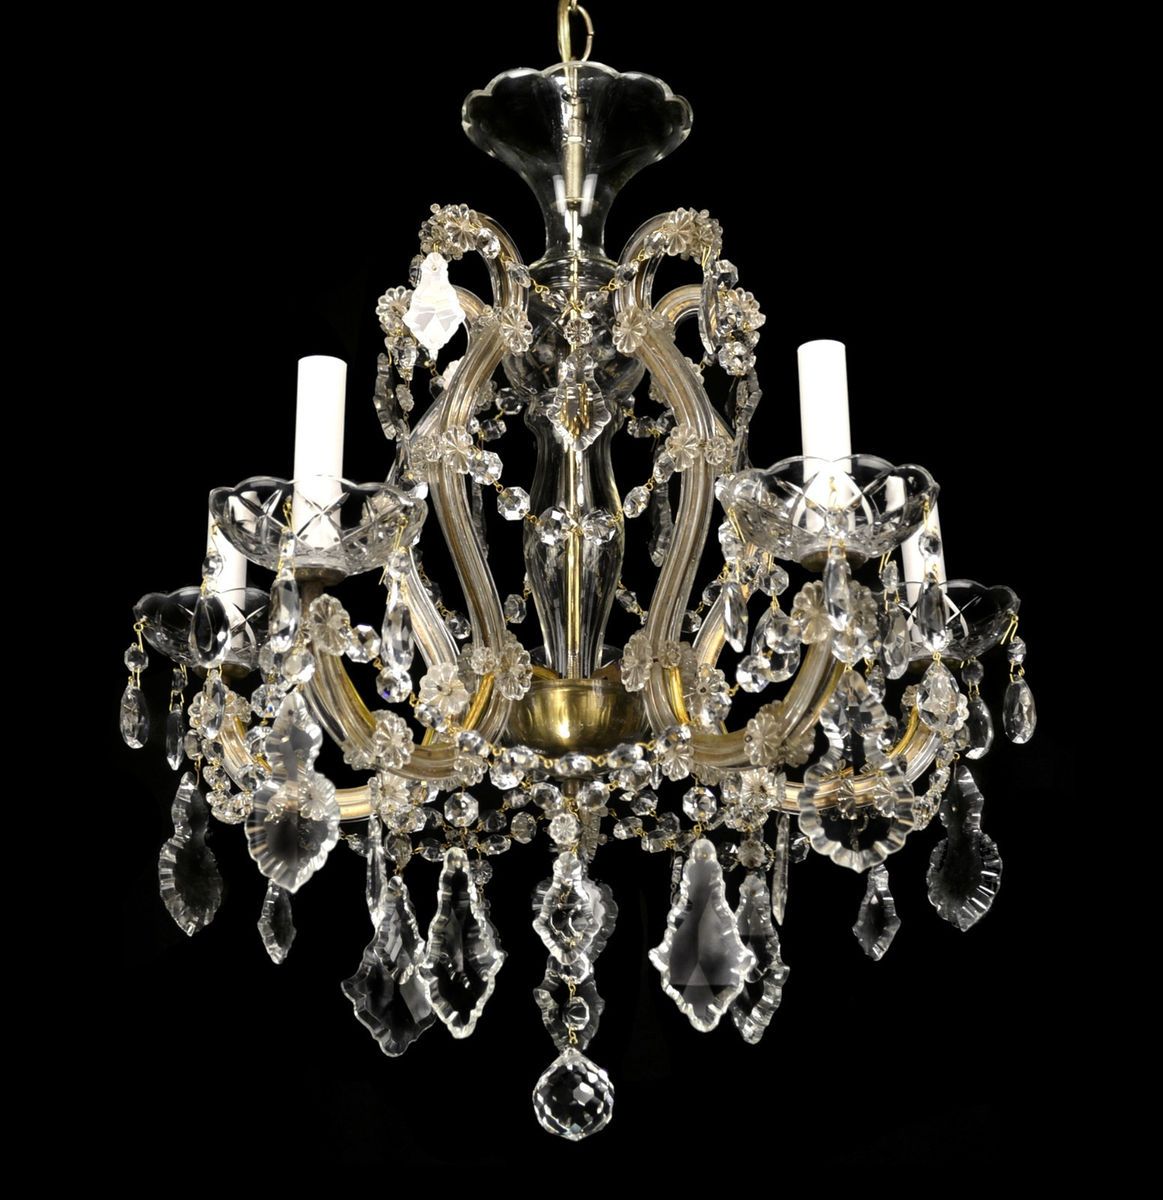 Antique Crystal Chandelier Vintage Maria Theresa Glass French Italian